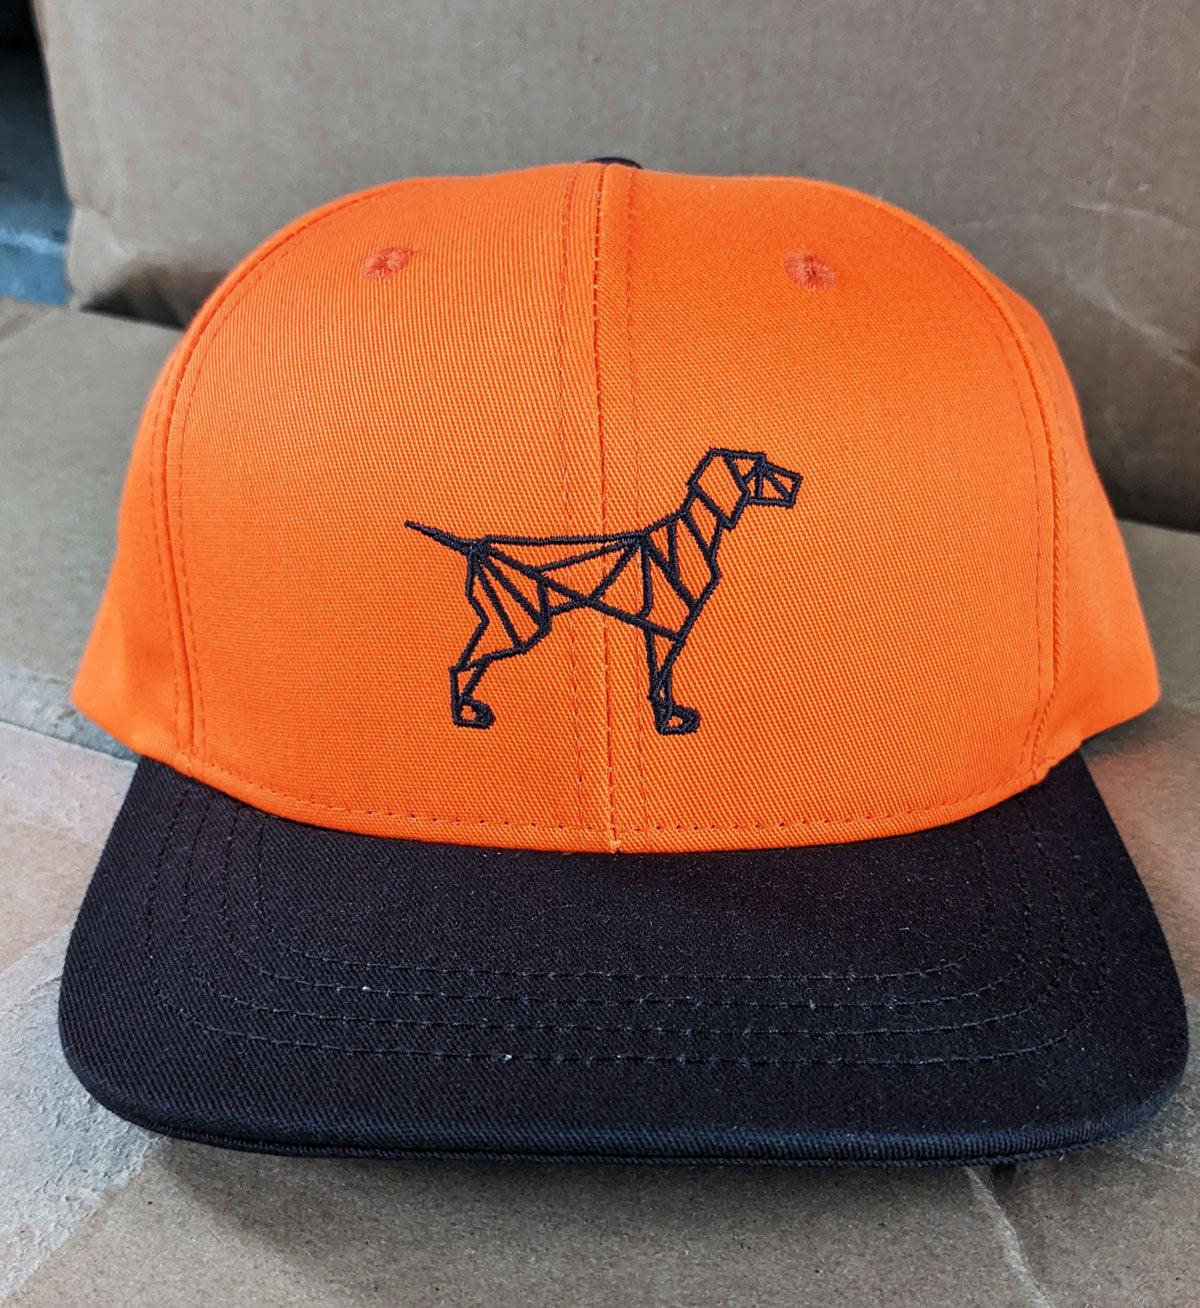 Blaze orange hunting dog hat for pointing dog lovers for field trials